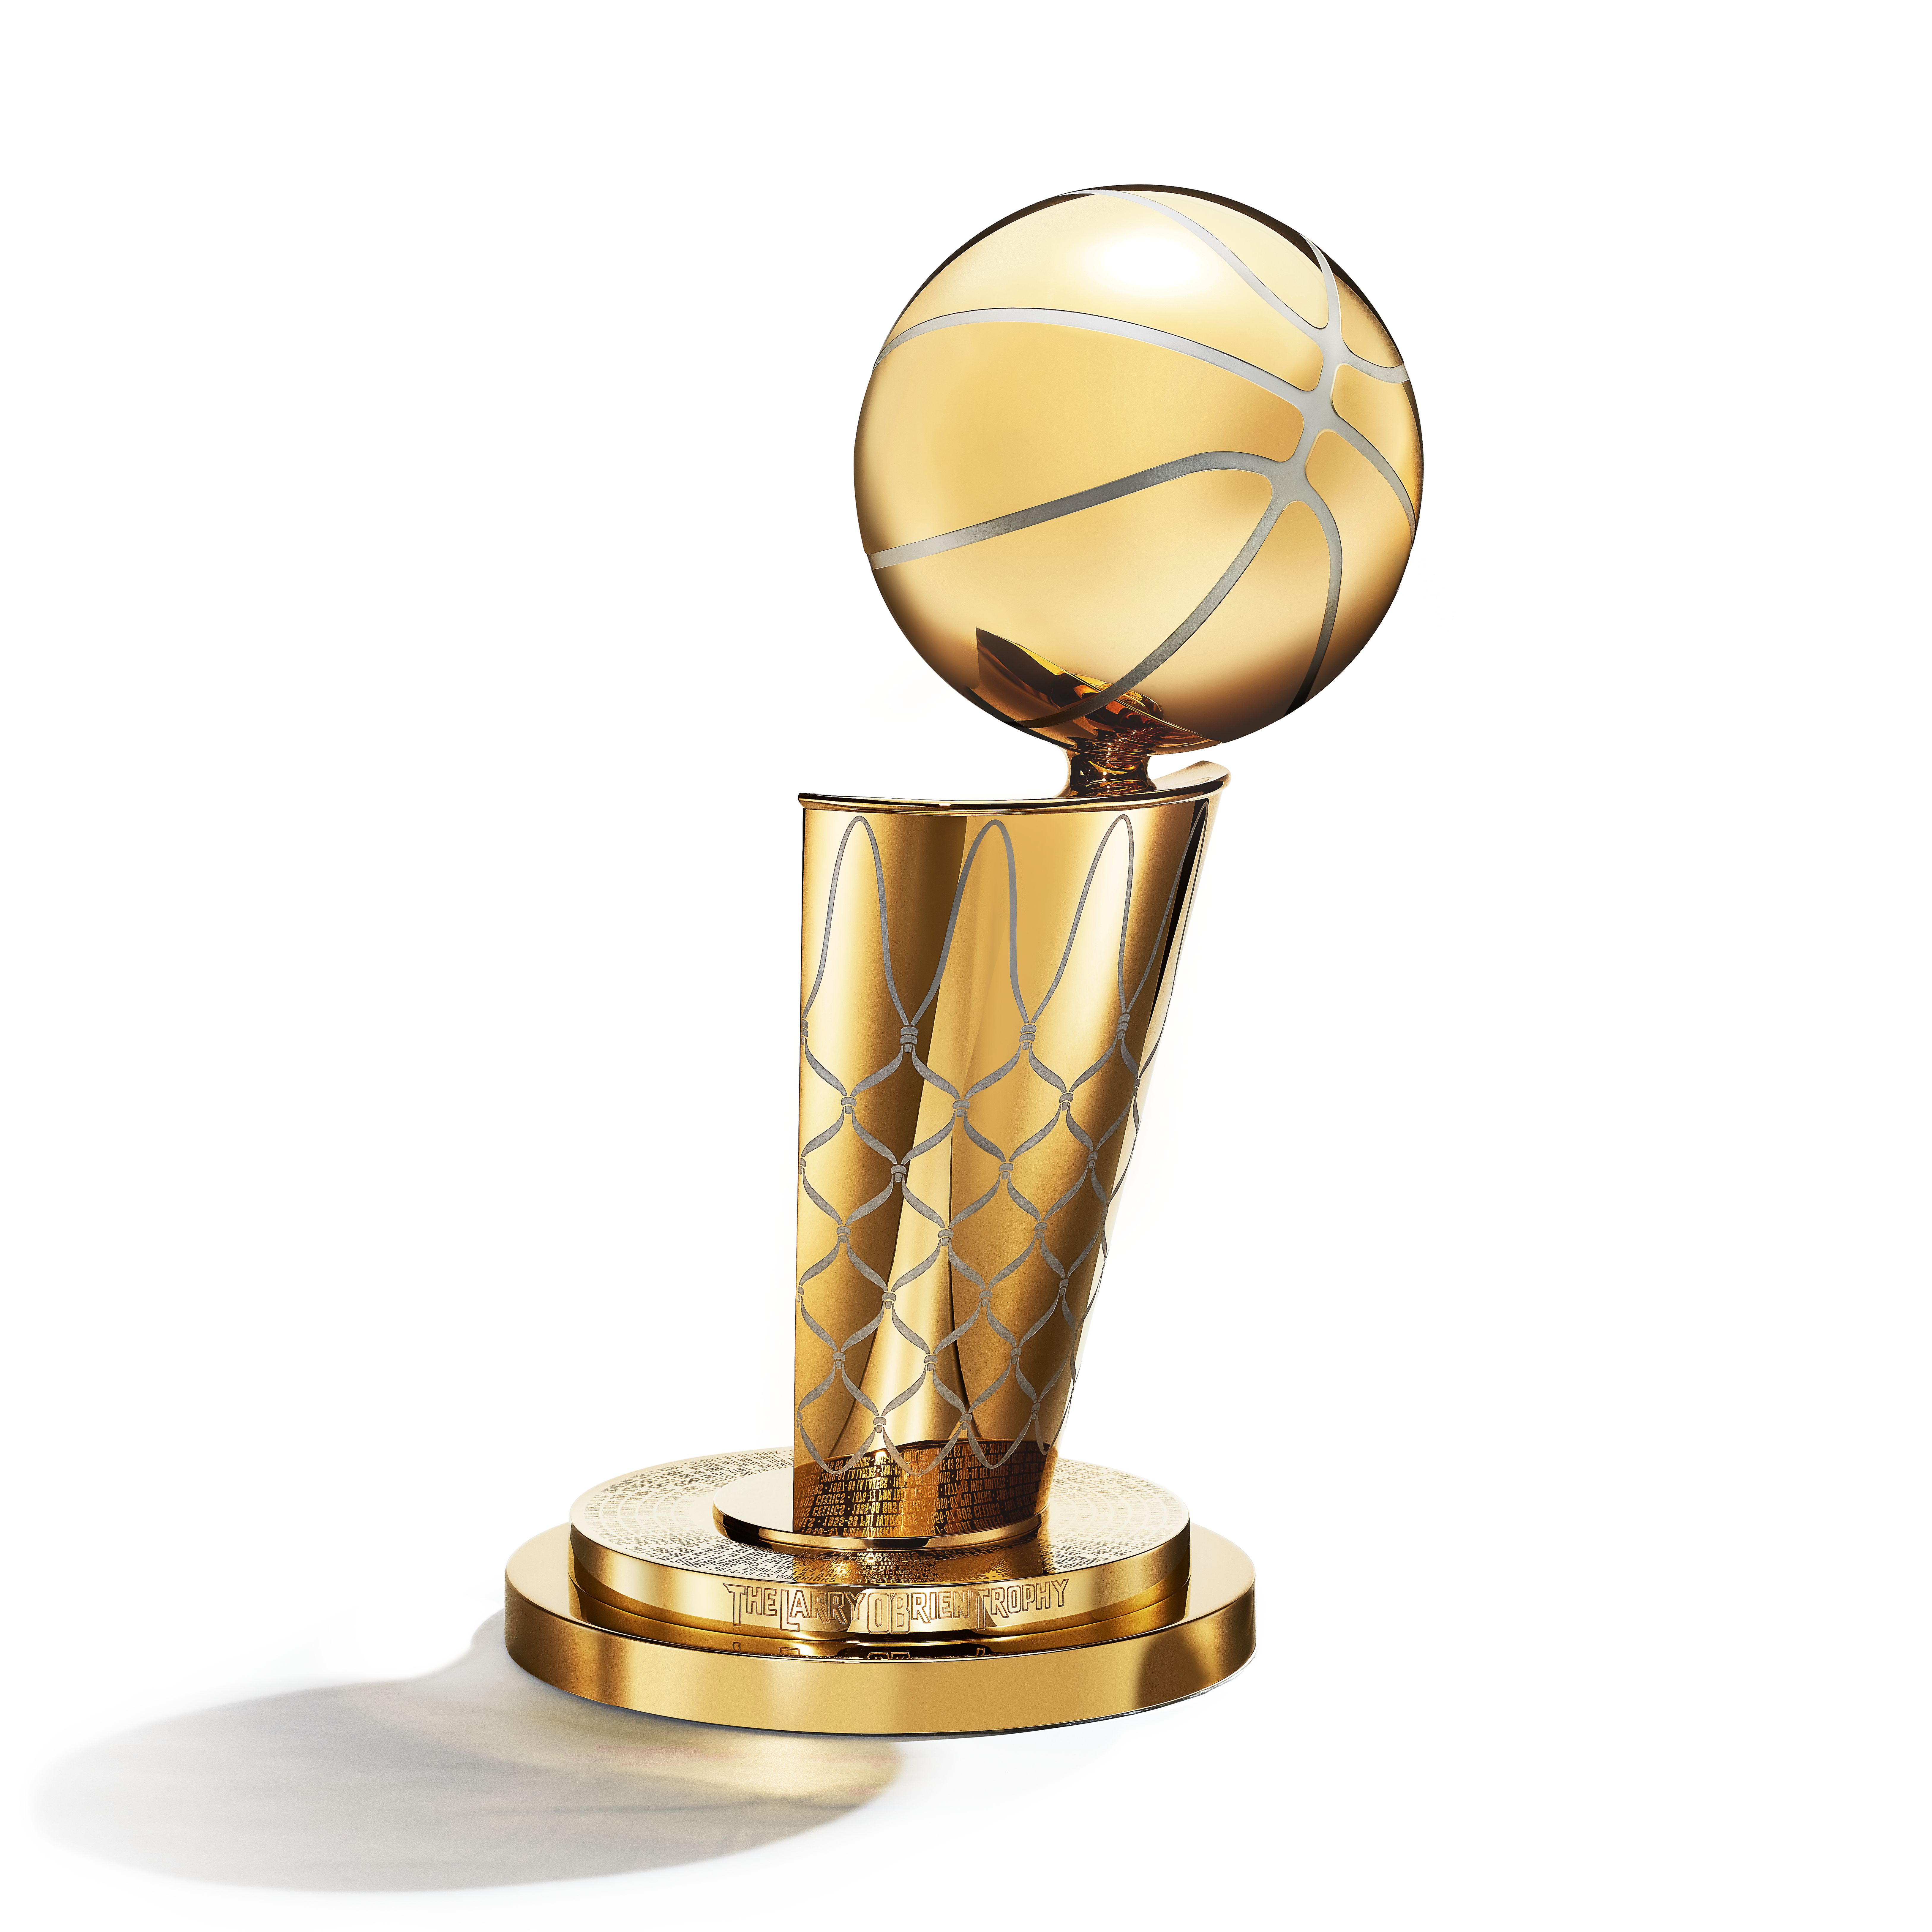 Tiffany & Co. and Victor Solomon Redesign NBA Championship Trophies